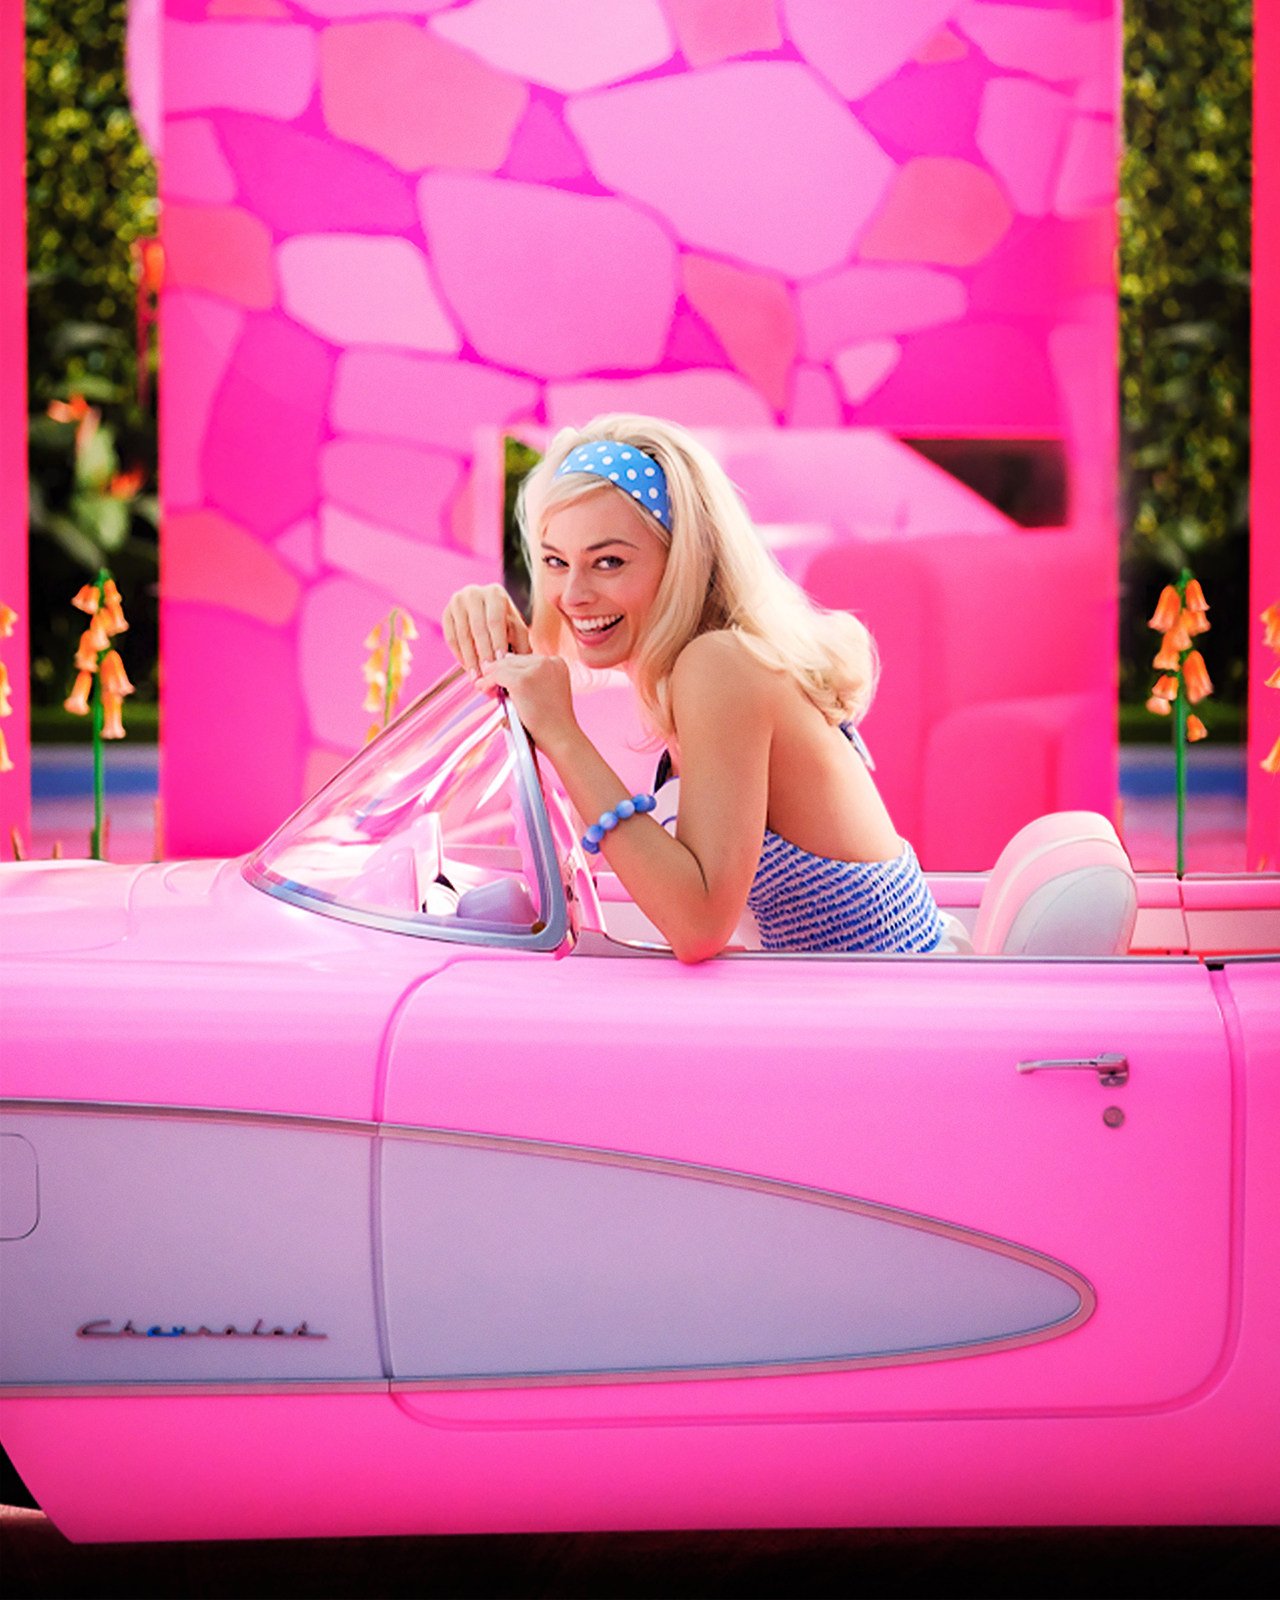 Margot Robbie and Ryan Gosling star in Barbie, a film that has propelled pink’s popularity on social media, and on runways all round the world. Photos: Warner Bros. Pictures/TNS